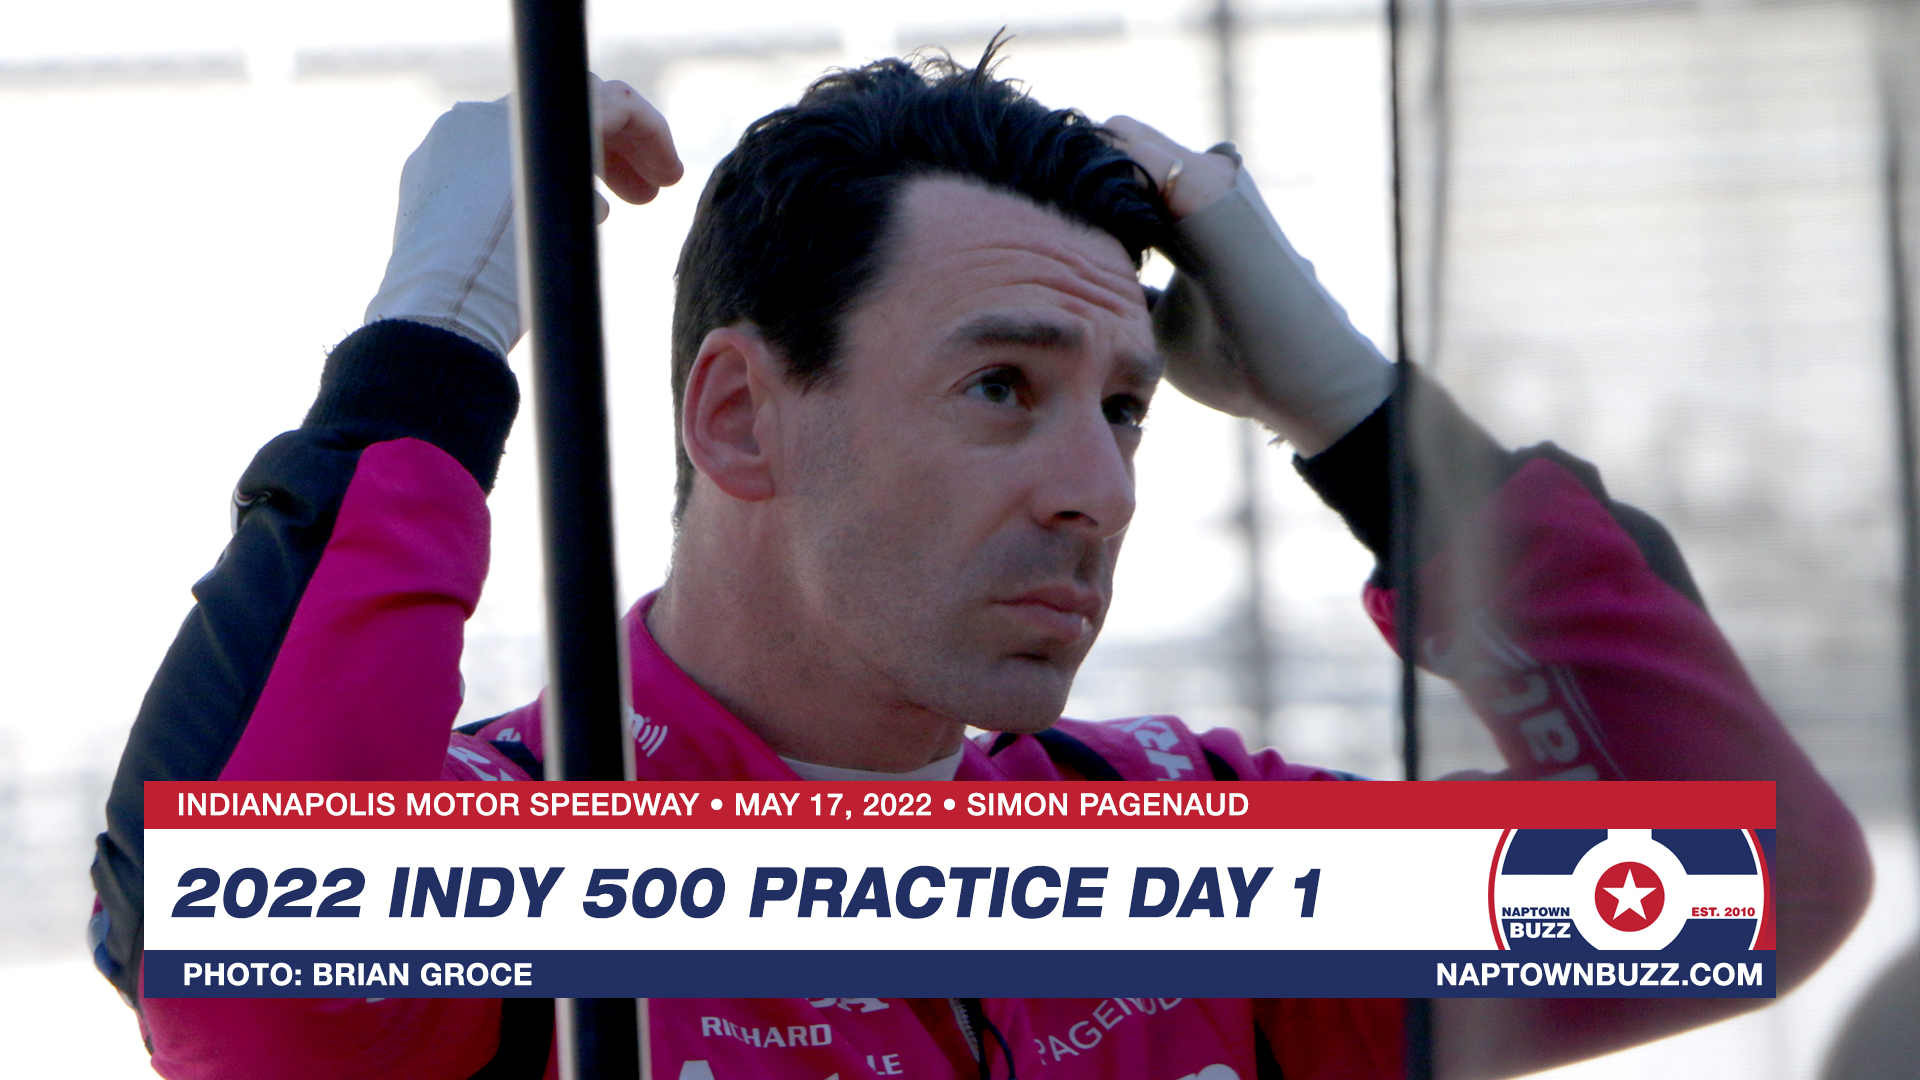 Simon Pagenaud on May 17, 2022, at Indianapolis Motor Speedway